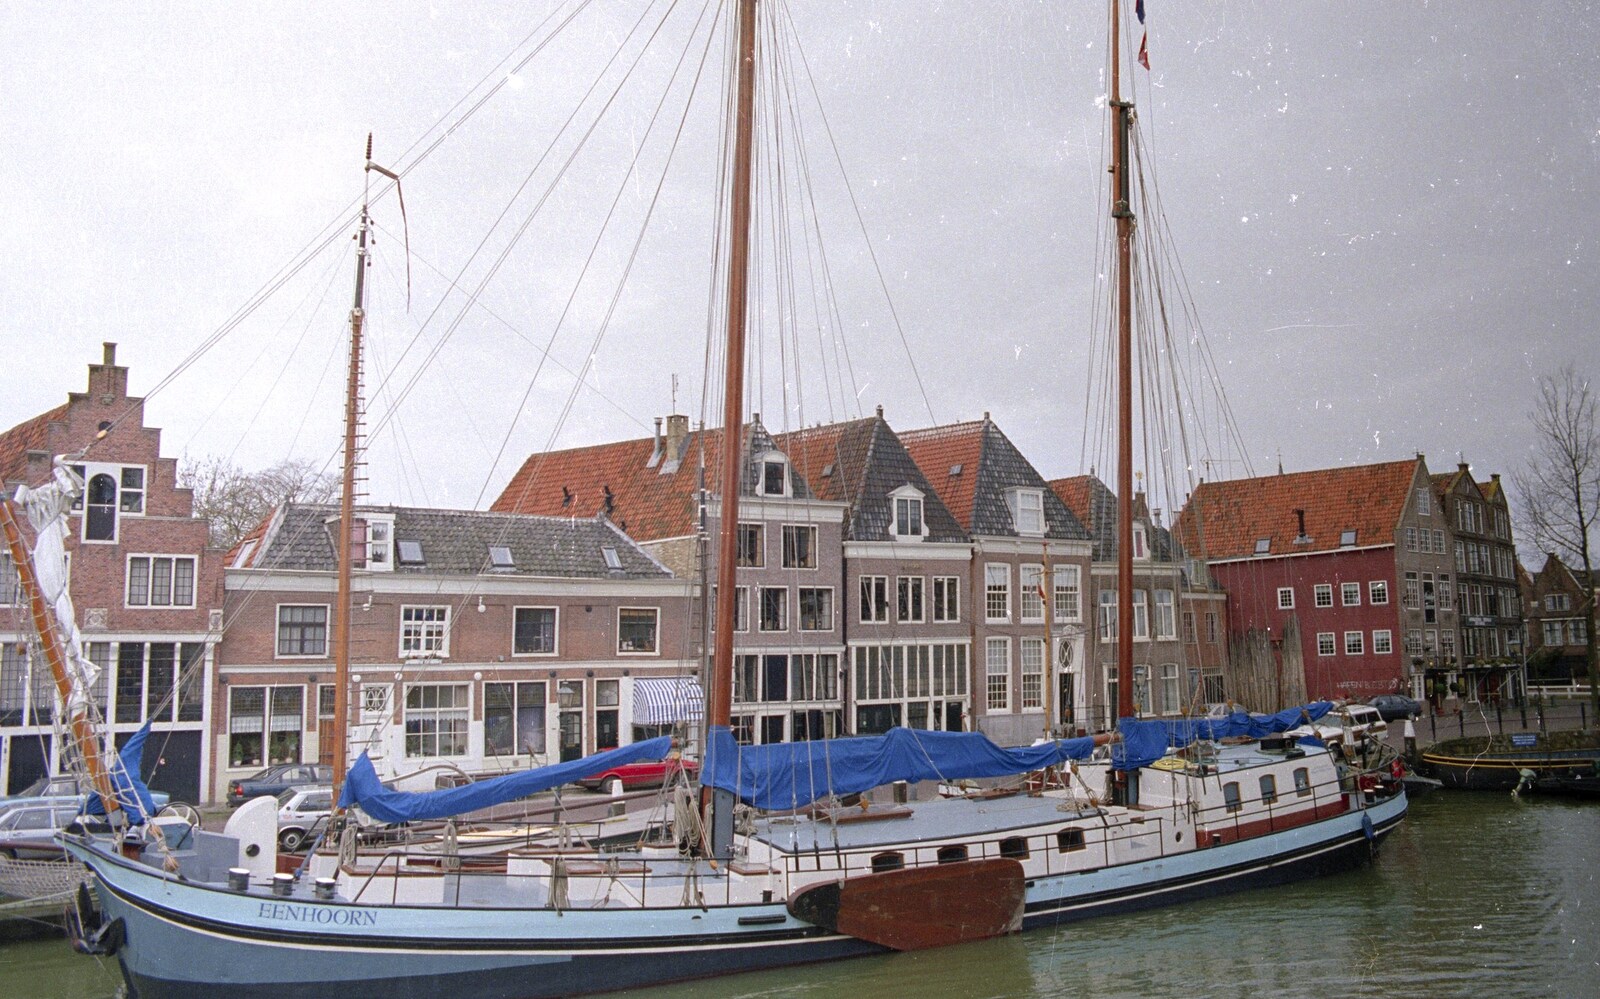 Out and About in Amsterdam, Hoorne, Vollendam and Edam, The Netherlands - 26th March 1992: The Eenhoorne river boat